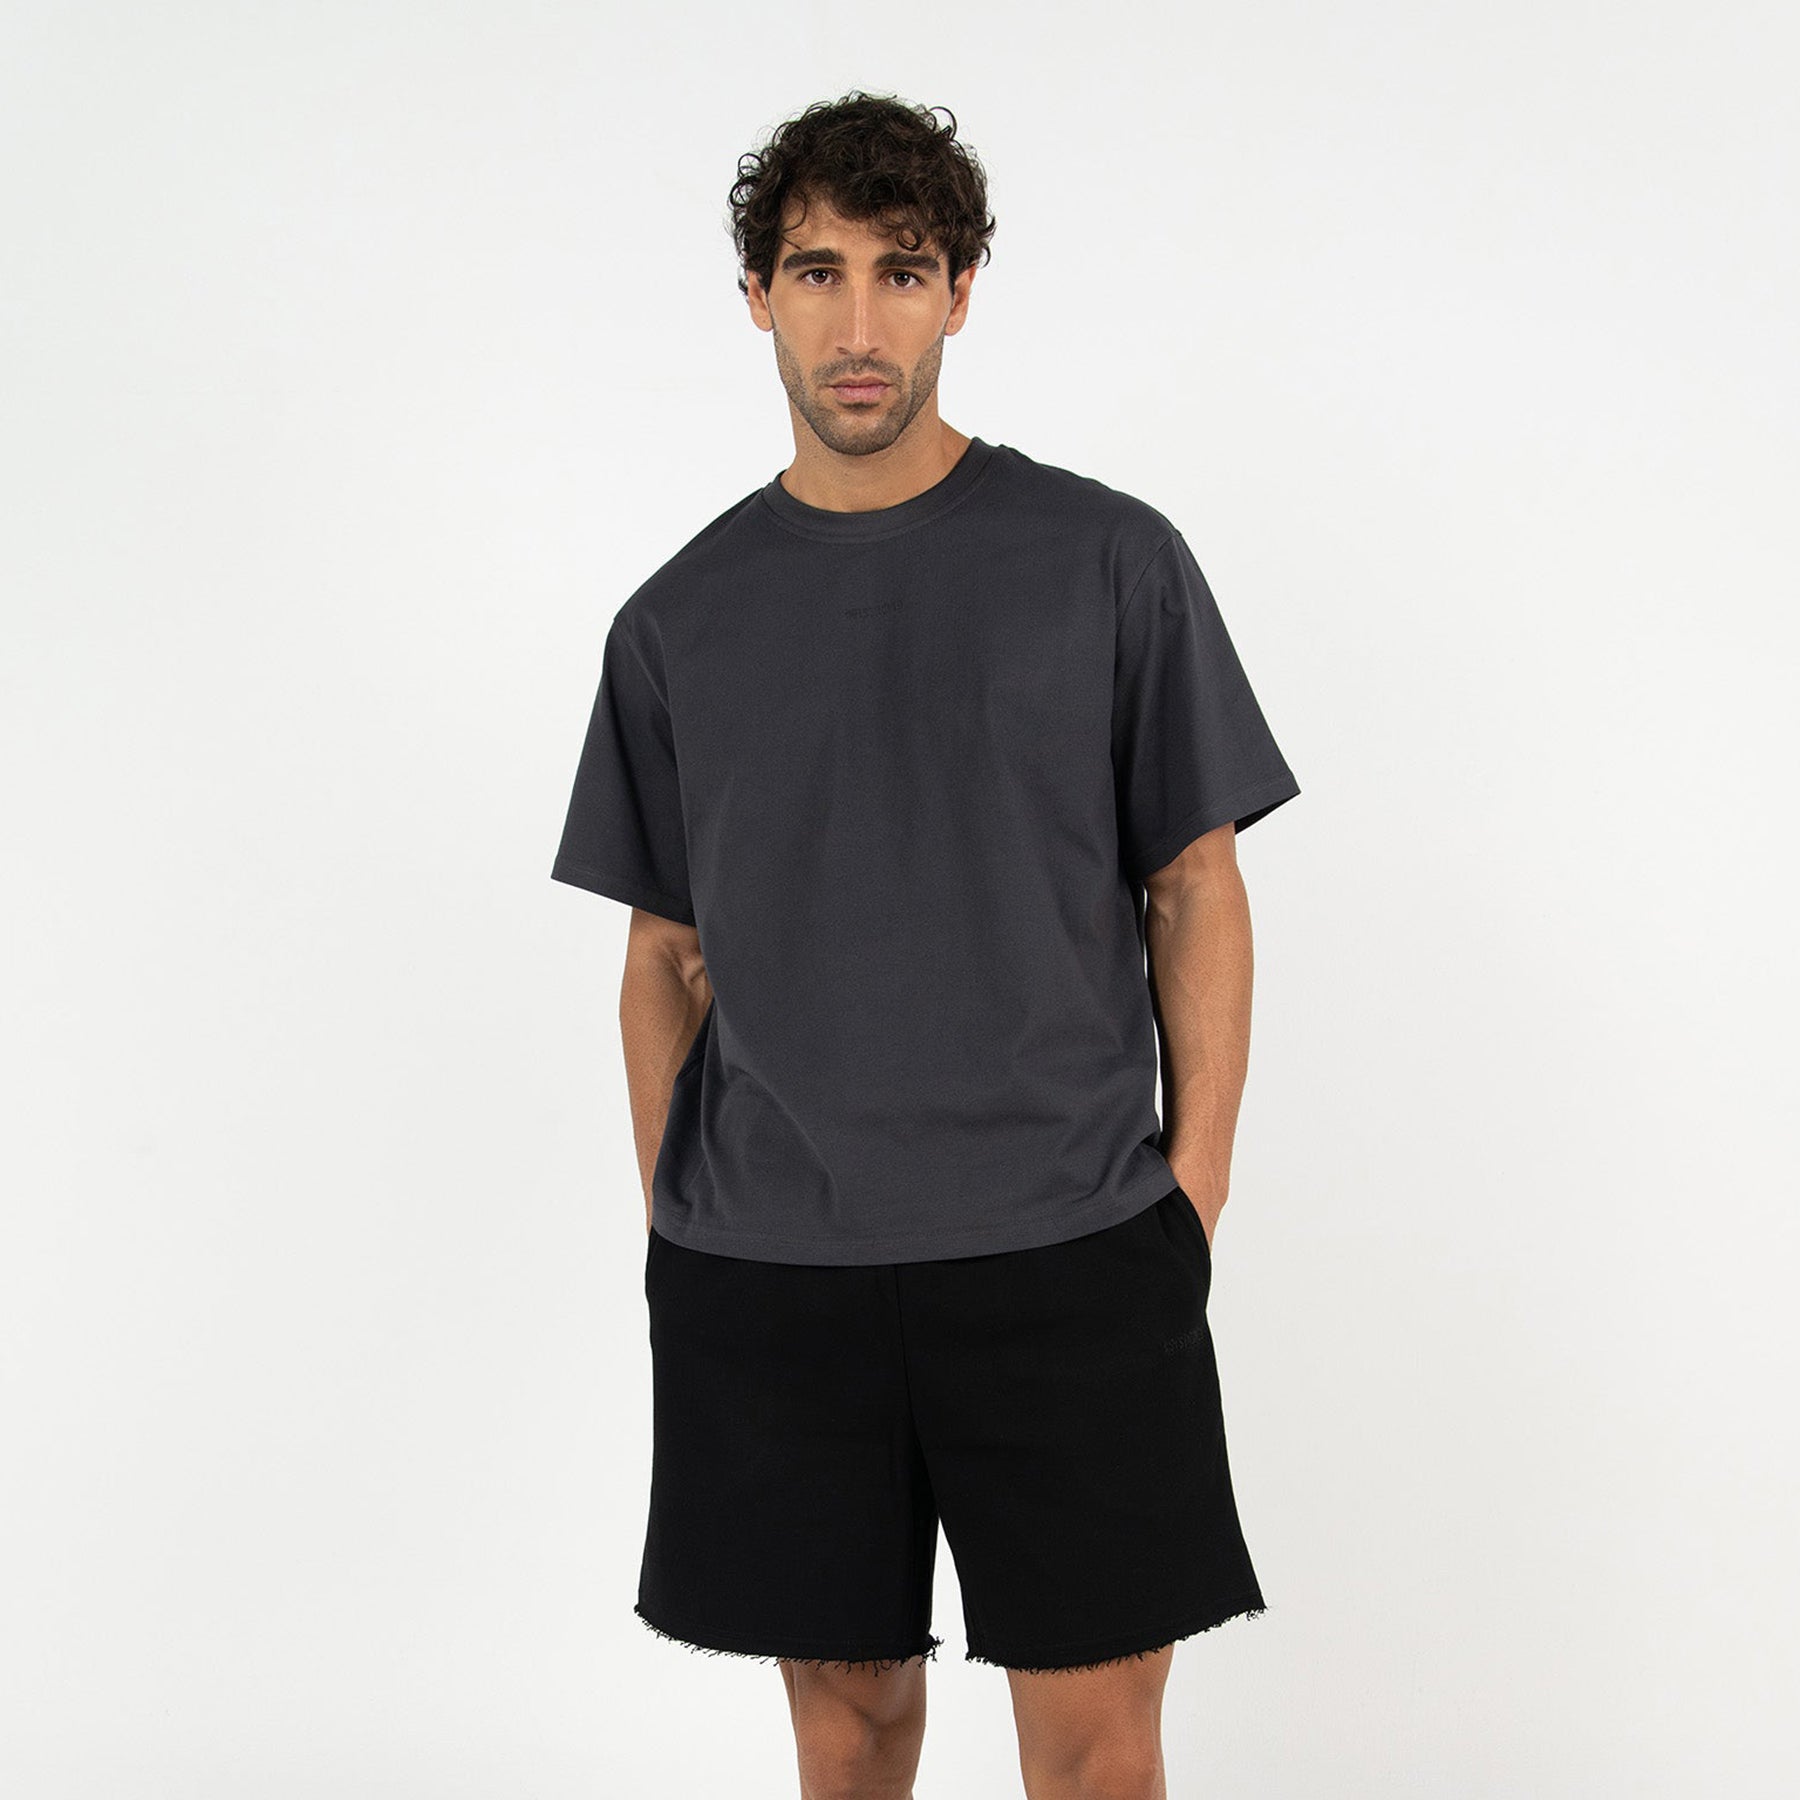 Notstitched Shorts